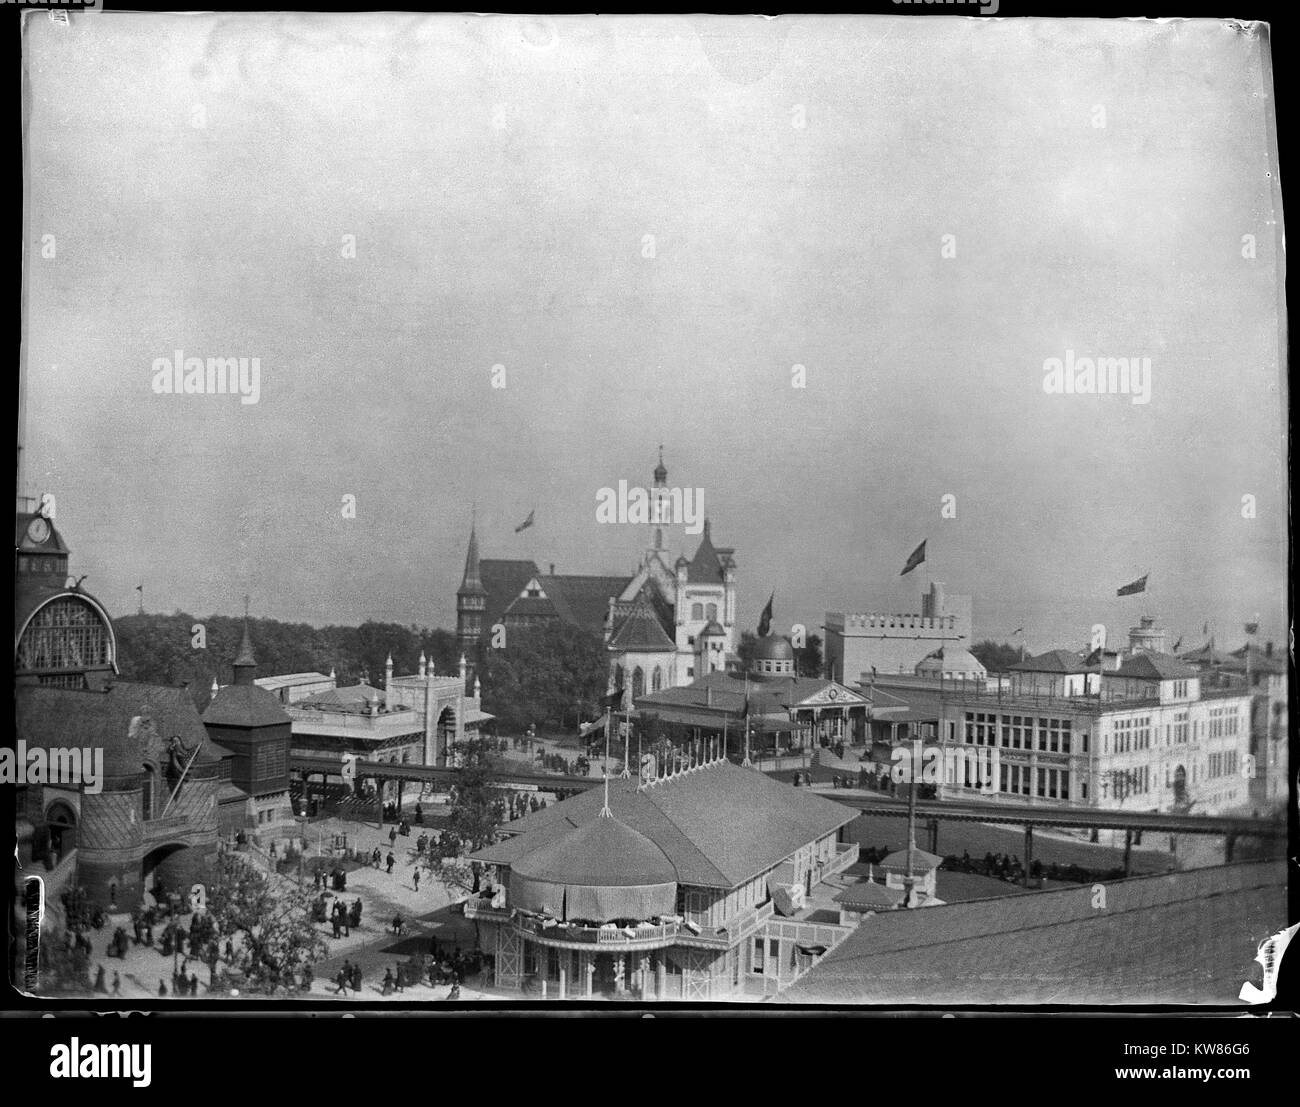 Aerial view of Polish Cafe and Elevated Railroad at the Chicago World's Fair Columbian Exposition. This world's fair was held in Chicago, Illinois from May 1 to October 30, 1893. Image from original camera nitrate negative. Stock Photo